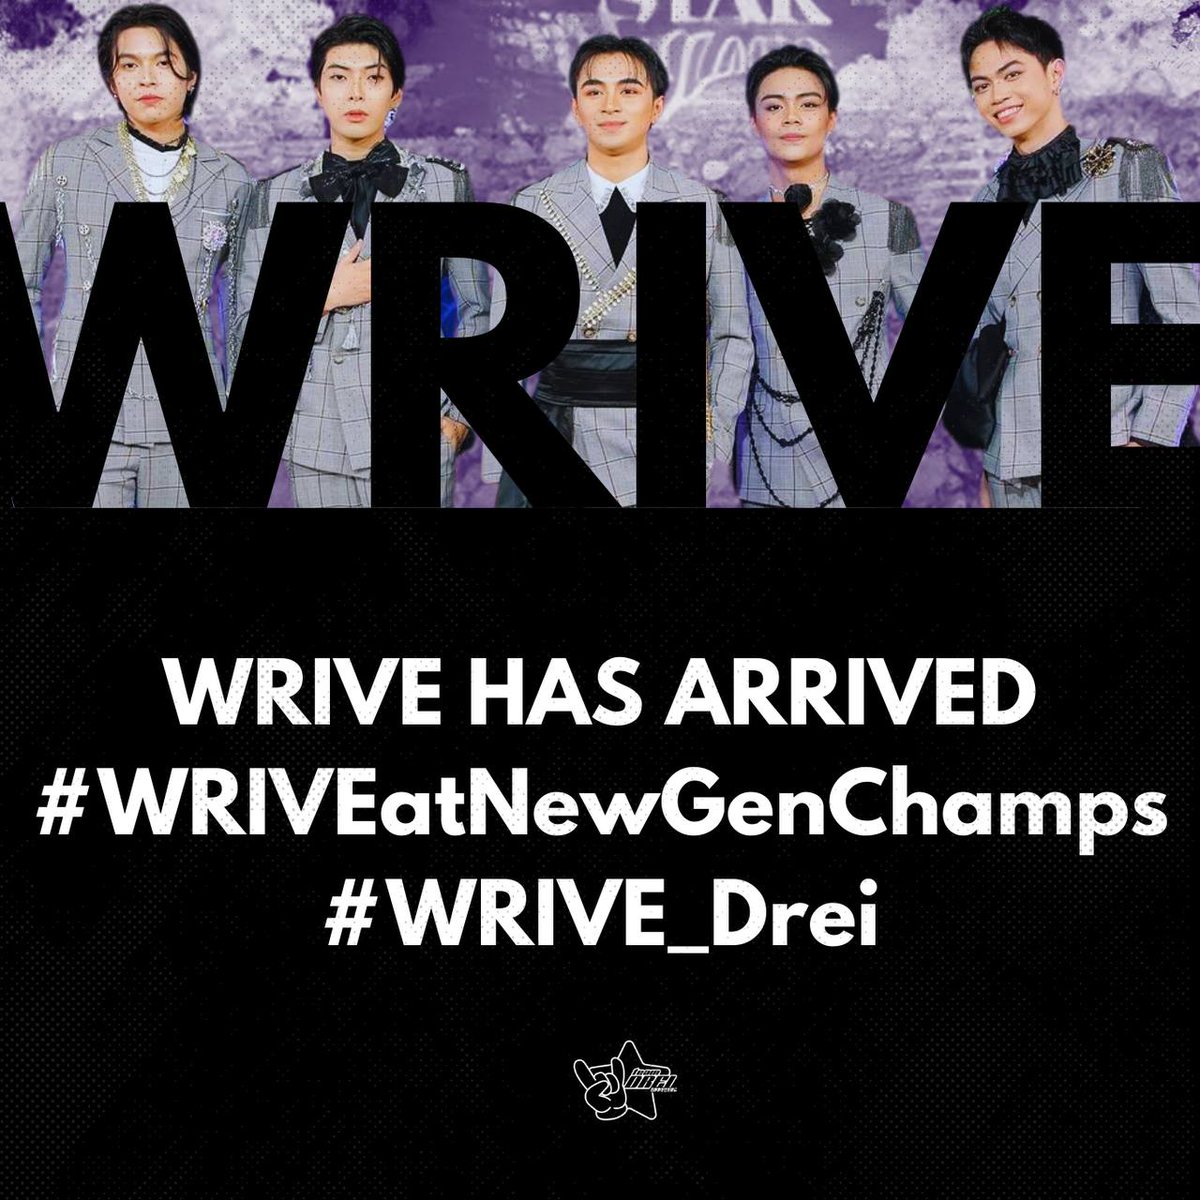 [💜]

In collaboration with
@teamasi_ph 
@ishiwormsofc
@russergeantsOFC
@teammathewofc 

We are holding a HASHTAG PARTY at 10 AM TOMORROW! Be loud and proud for WRIVE's first-ever group performance!! 💜

WRIVE HAS ARRIVED
#WRIVEatNewGenChamps
#WRIVE_Drei